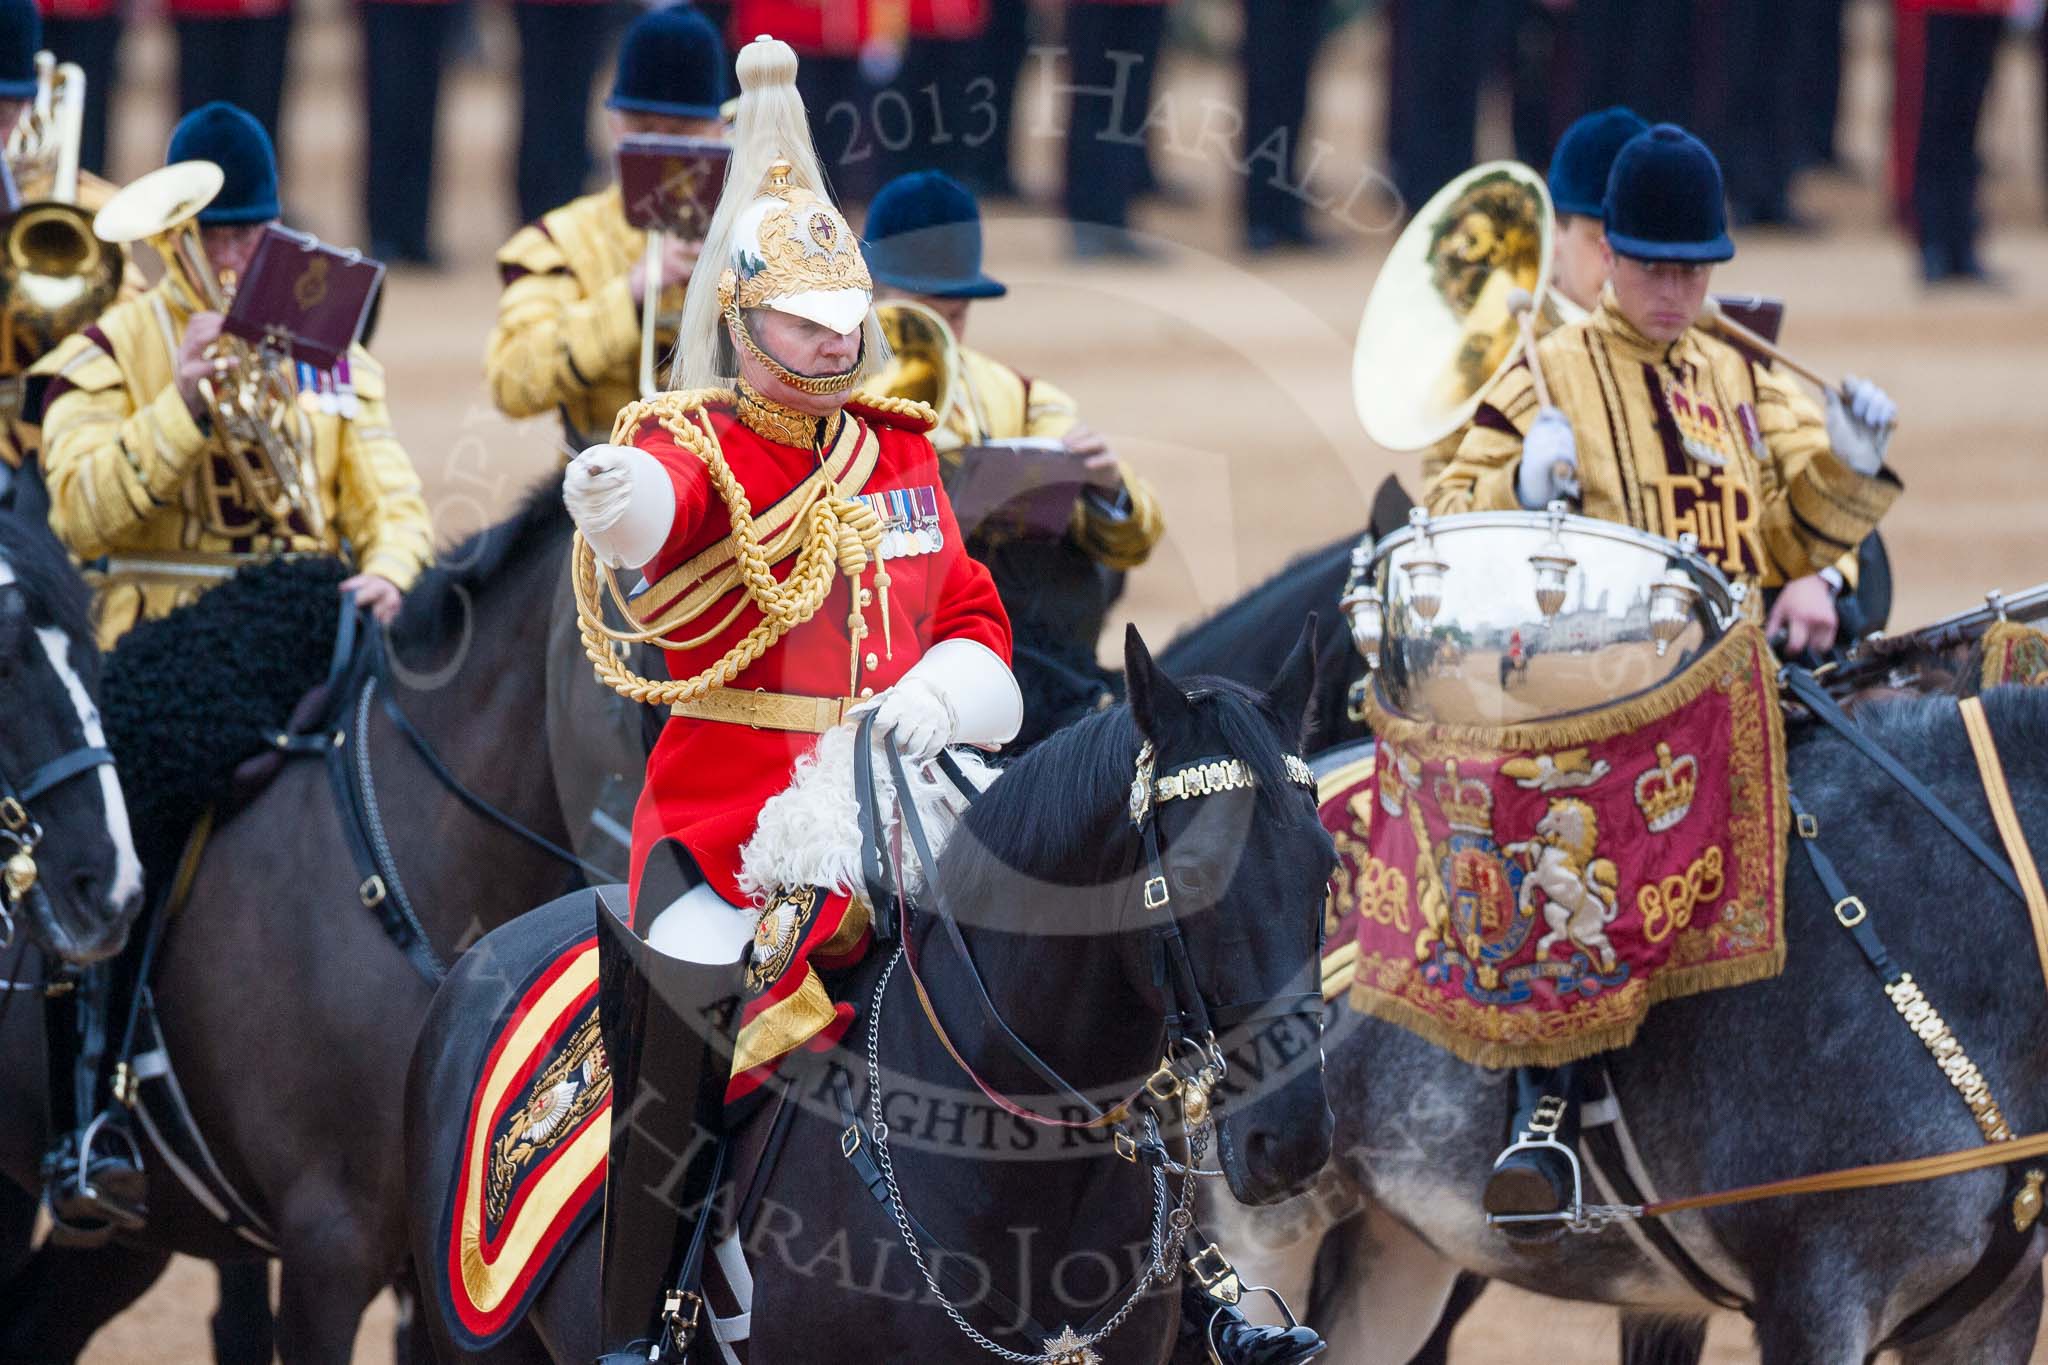 Trooping the Colour 2015. Image #572, 13 June 2015 11:56 Horse Guards Parade, London, UK